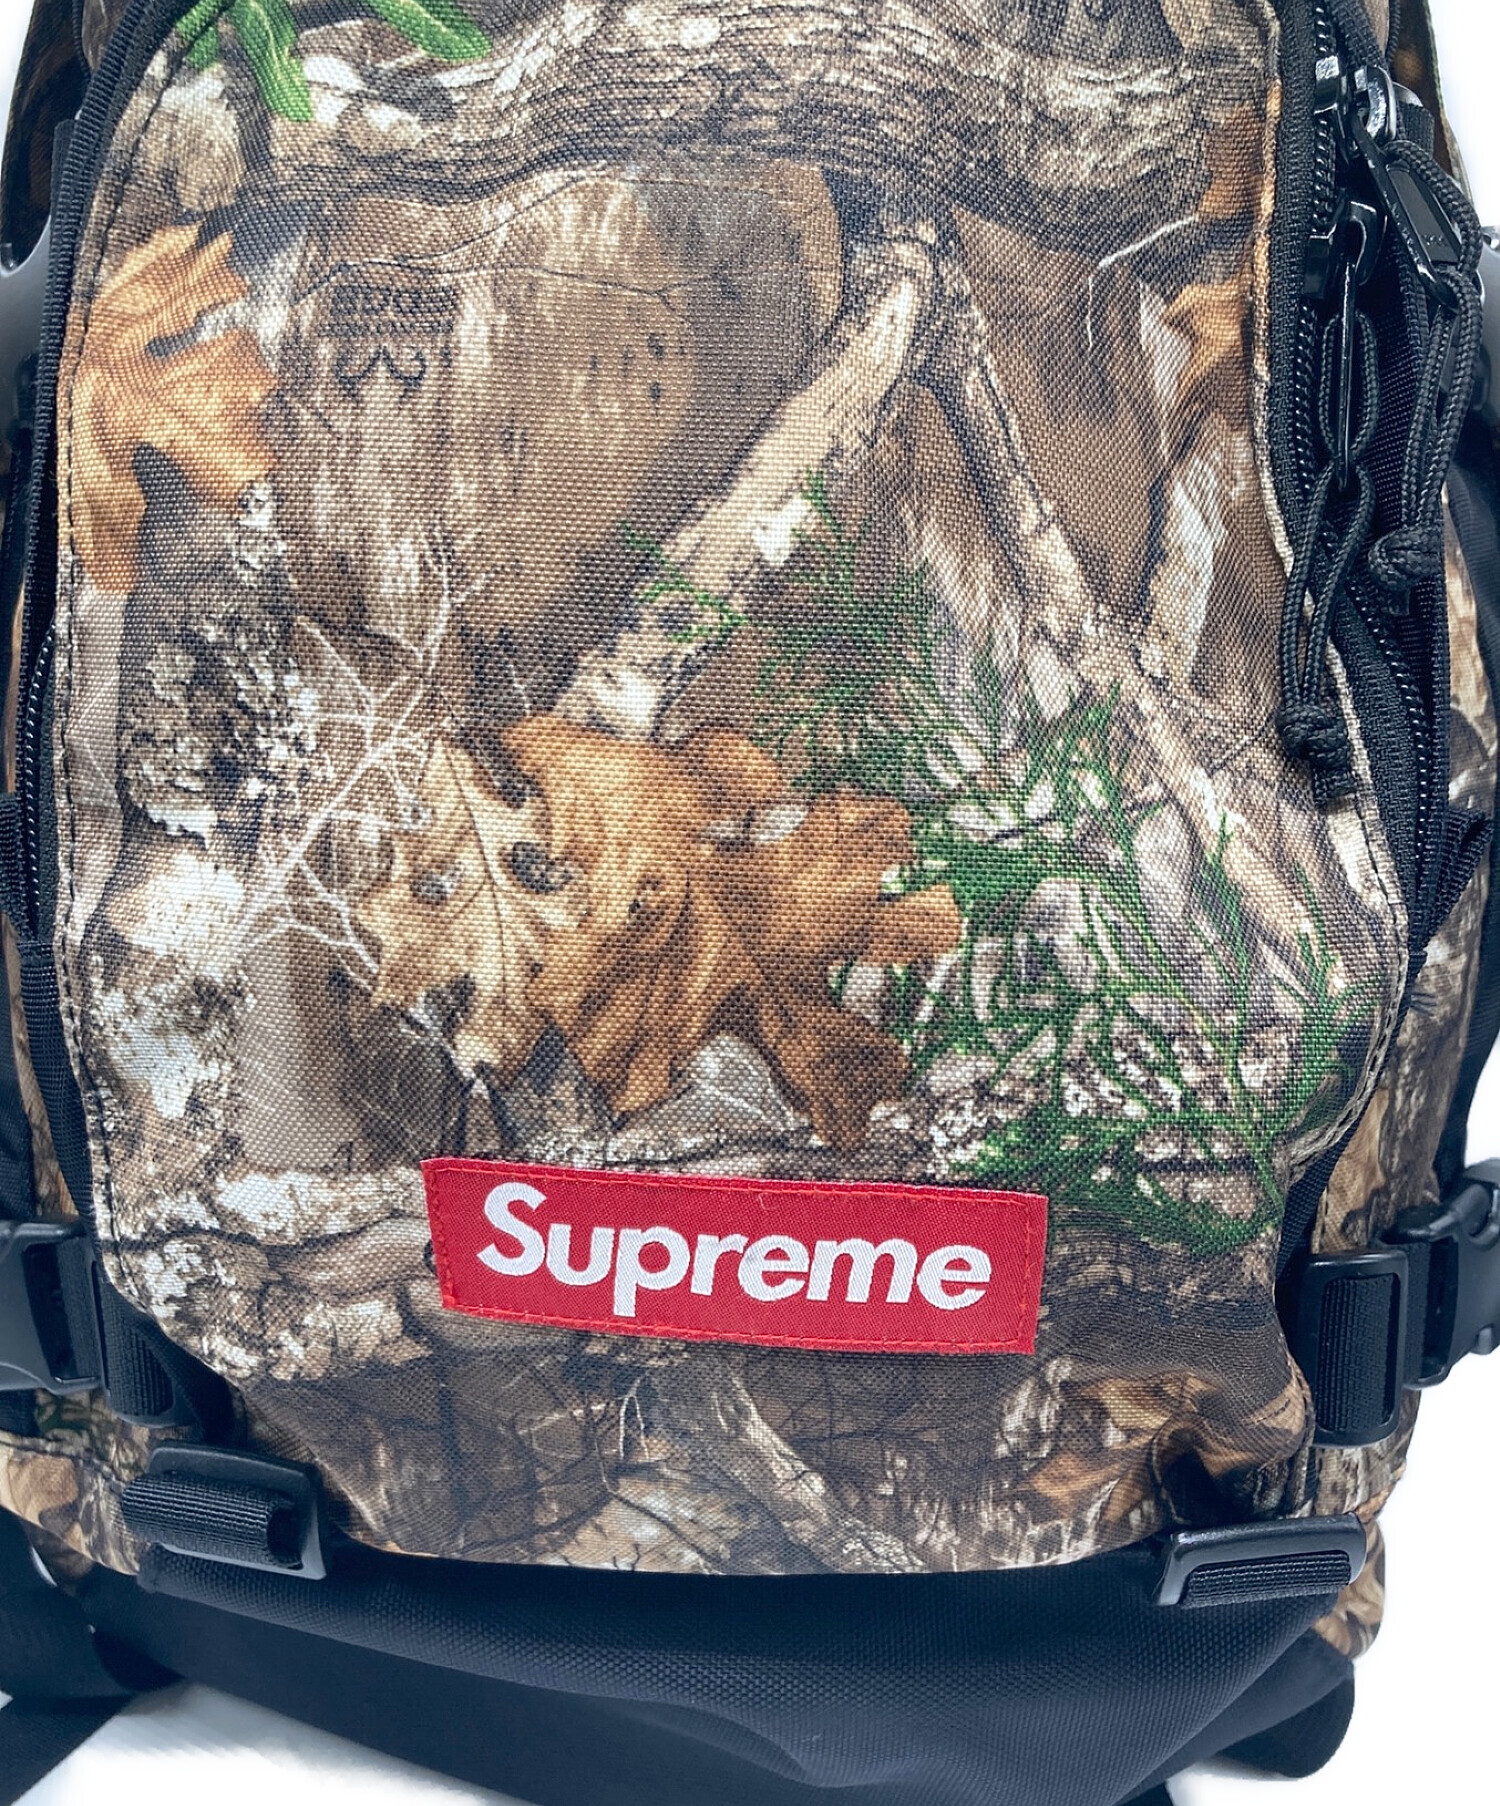 SUPREME (シュプリーム) Real Tree Camo Backpack/リアルツリーカモ バックパック